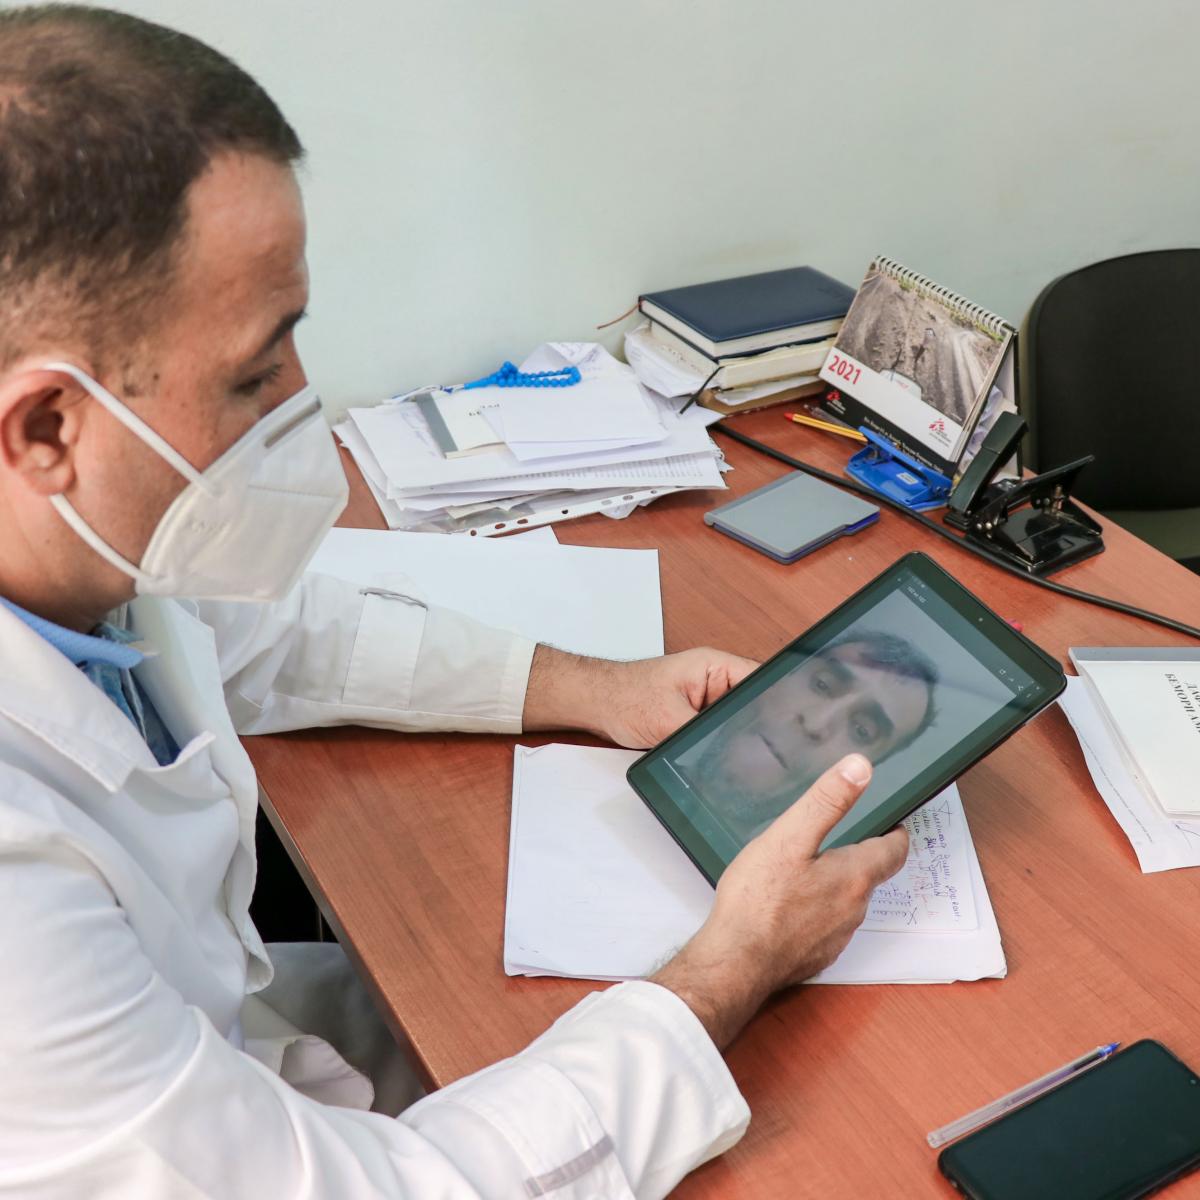 A doctor’s video chats with TB patients while they take their TB medications